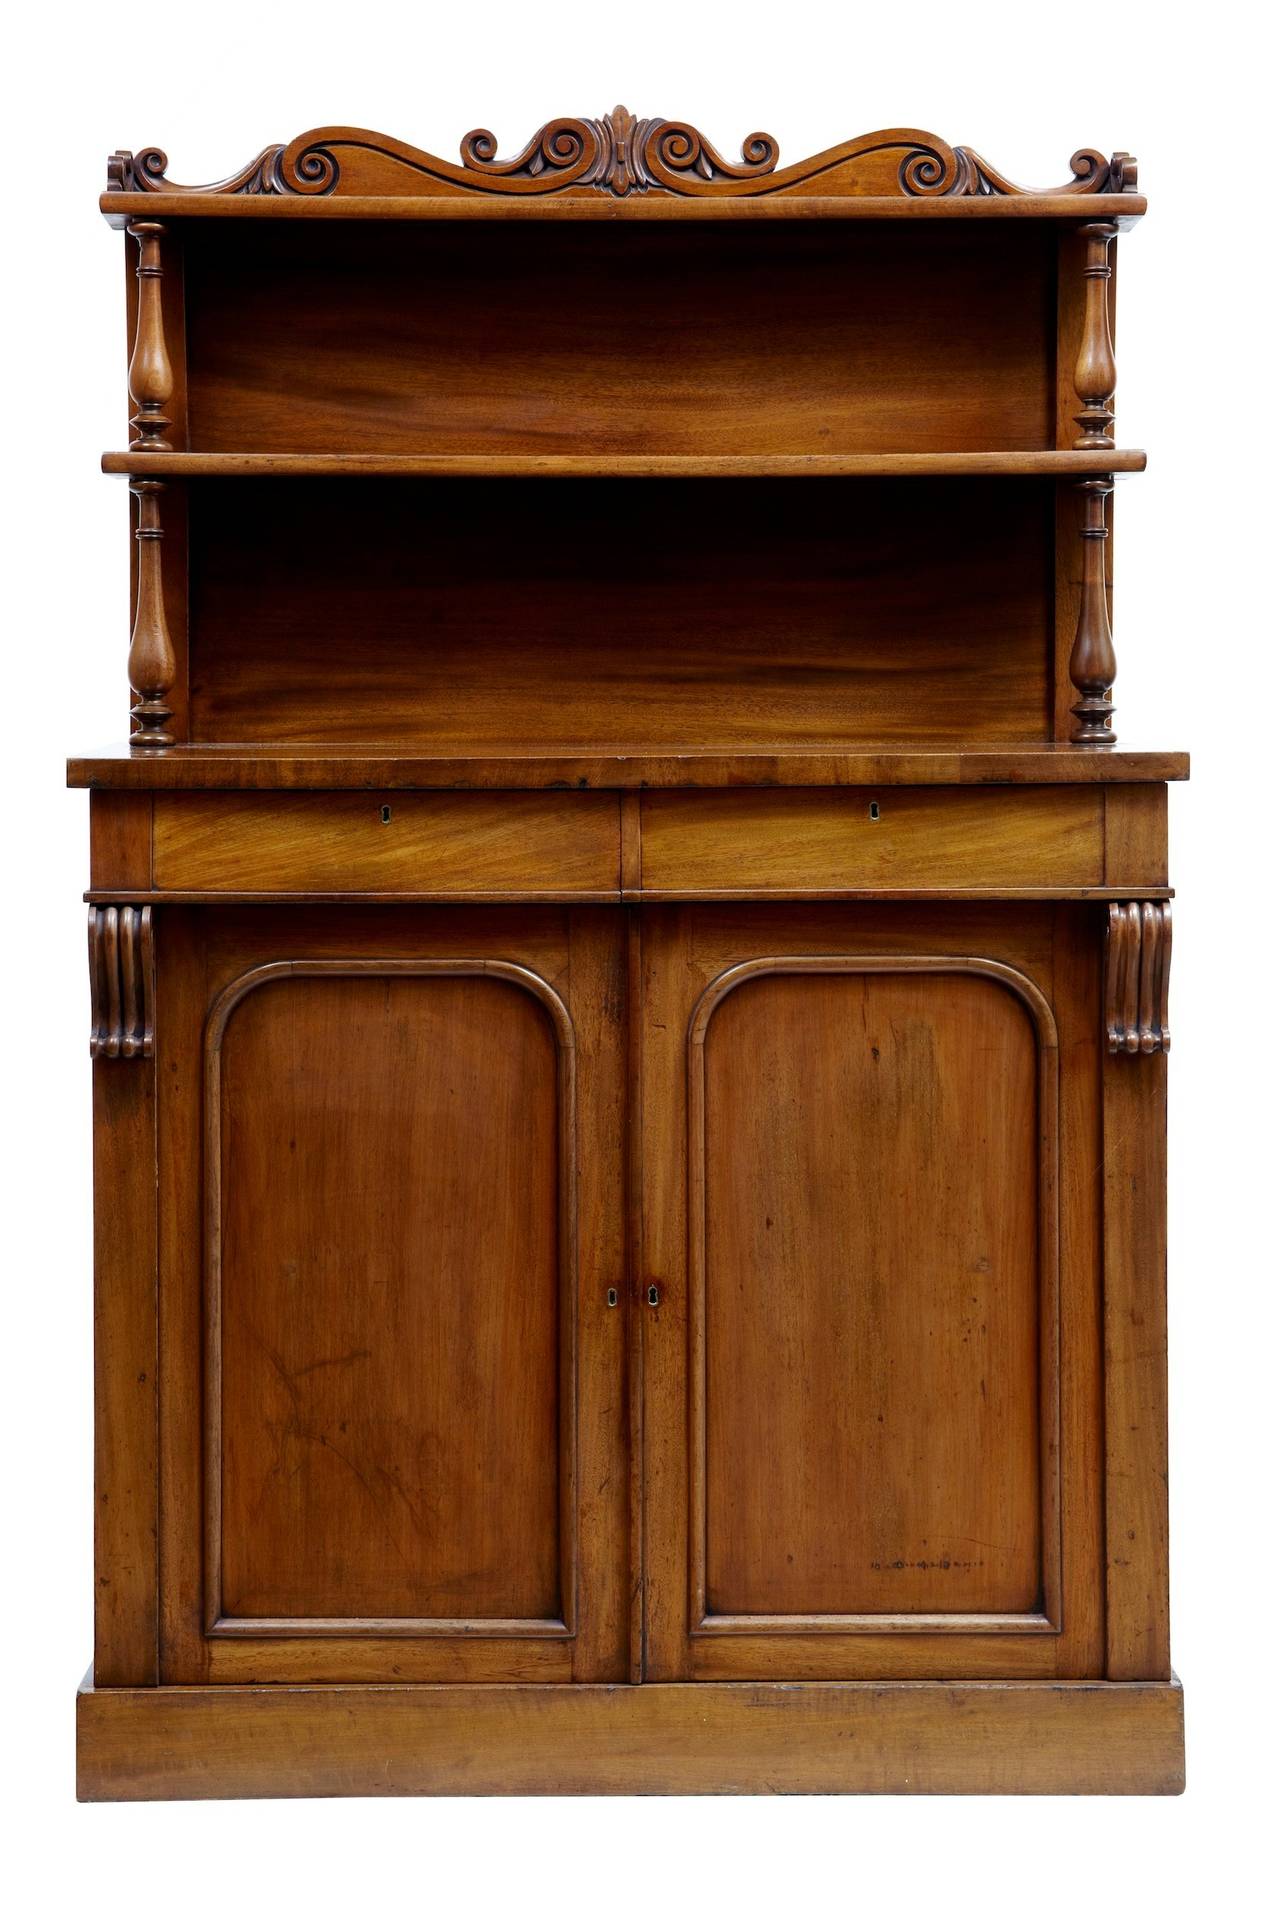 Good quality French mahogany chiffioner, circa 1840.

Rich in colour, featuring two shelves supported by turned supports. Two drawers above the double doors that open to reveal two shelves (one shallow).

Measures: Height 60 3/4